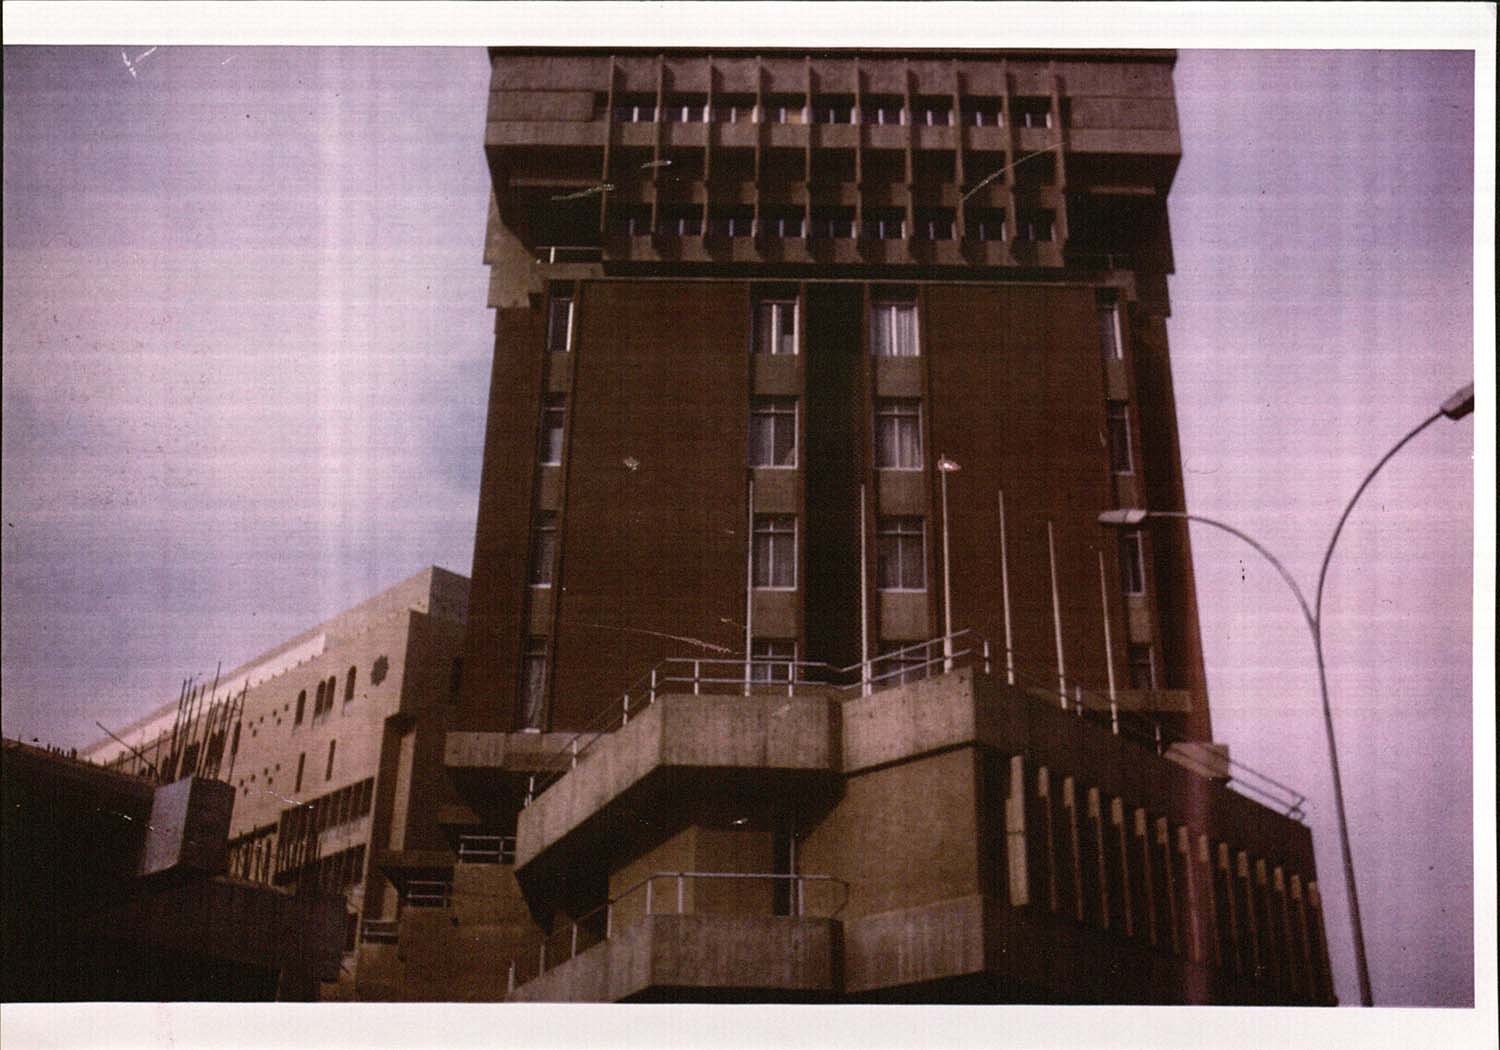 Exterior view of the 1965 Iraqi Reinsurance Building highlighting the hierarchical design of the upper floors.